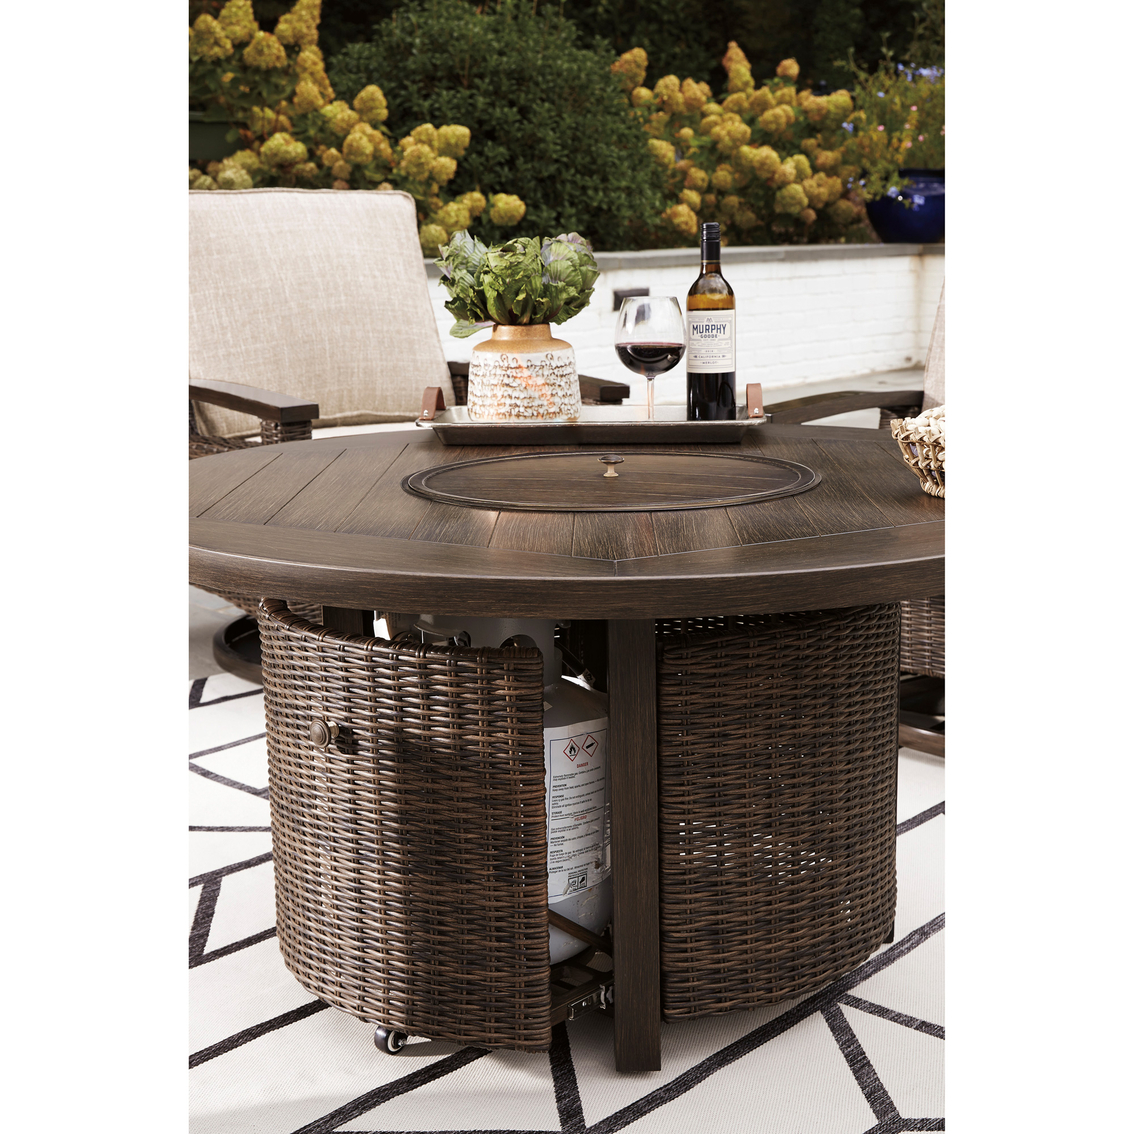 Signature Design by Ashley Grasson Lane Lounge Chairs, Loveseat, Firepit Table Set - Image 8 of 8